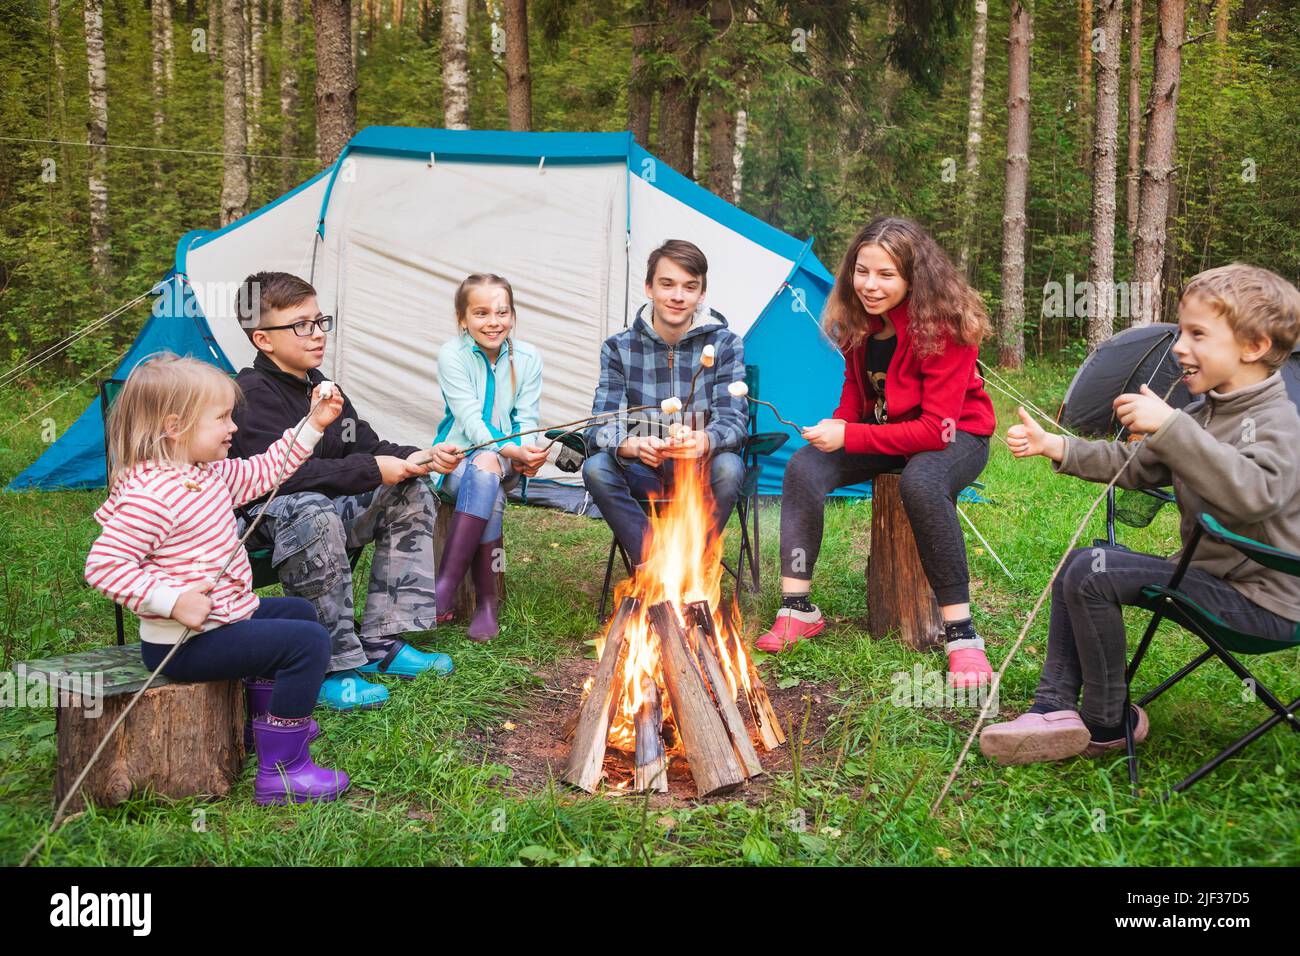 Six children of different age sitting together around burning bonfire roasting marshmallows while camping in a summer forest. Camping tents are seen i Stock Photo